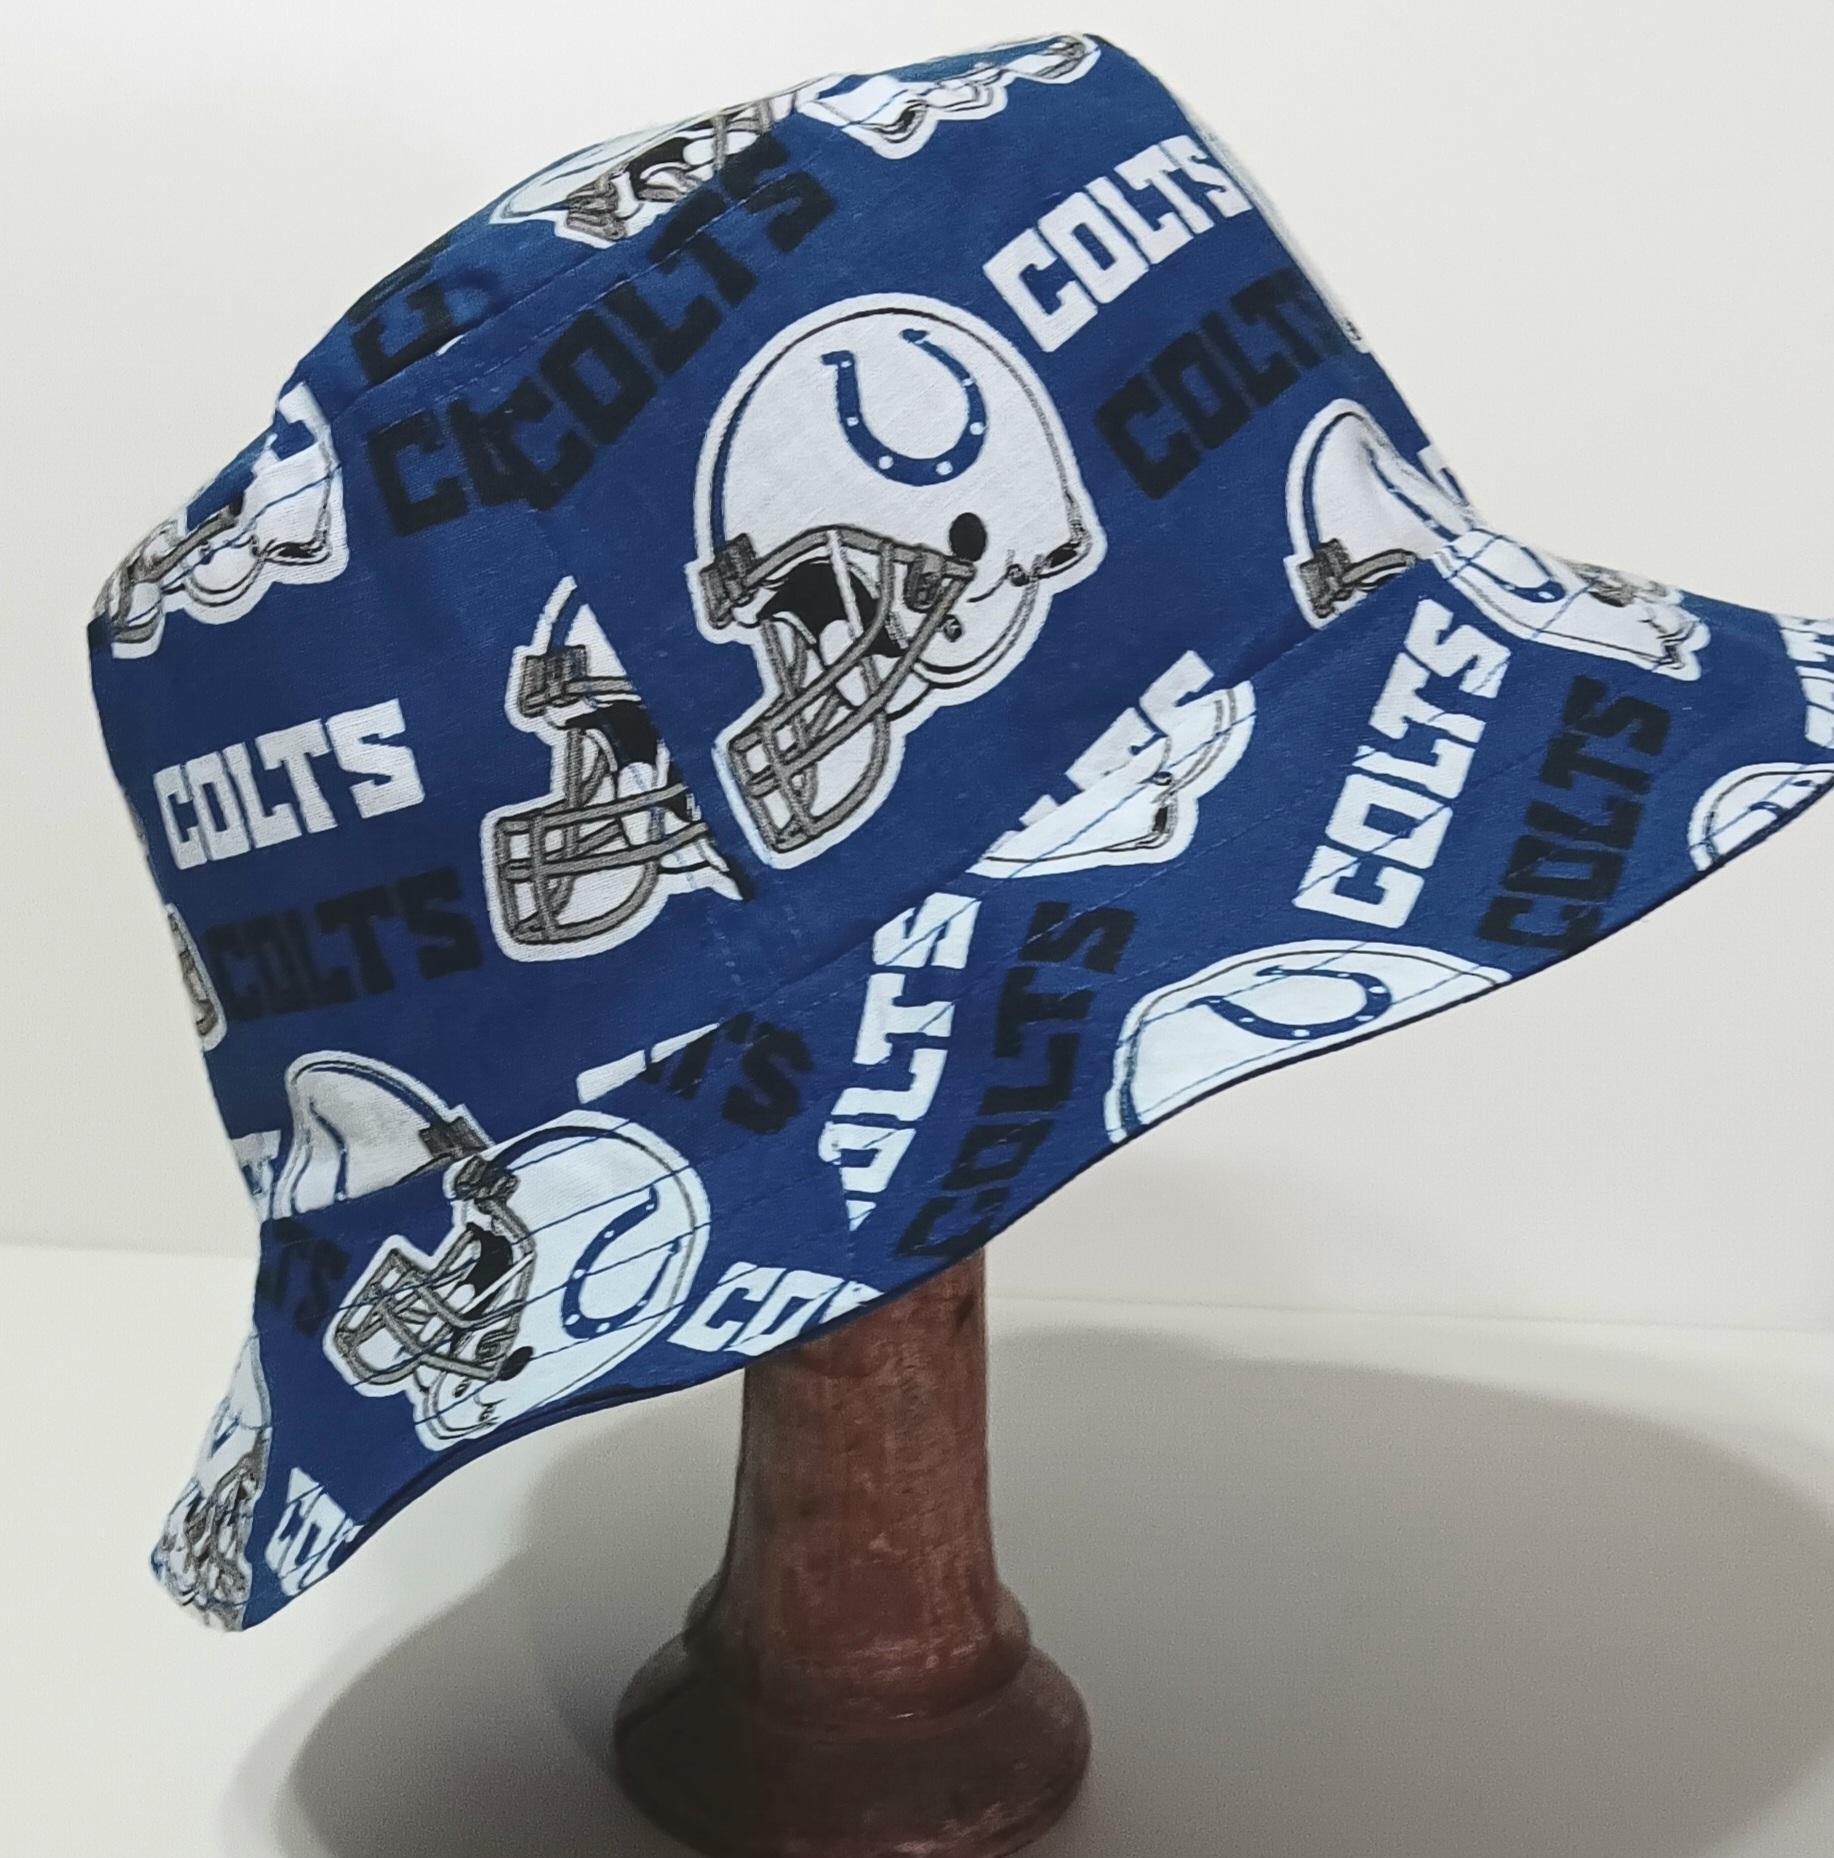 Indianapolis Colts Bucket Hat, Reversible, Unisex Sizes S-XXL, cotton, summer fishing hat, sun hat, floppy hat, adults or older children